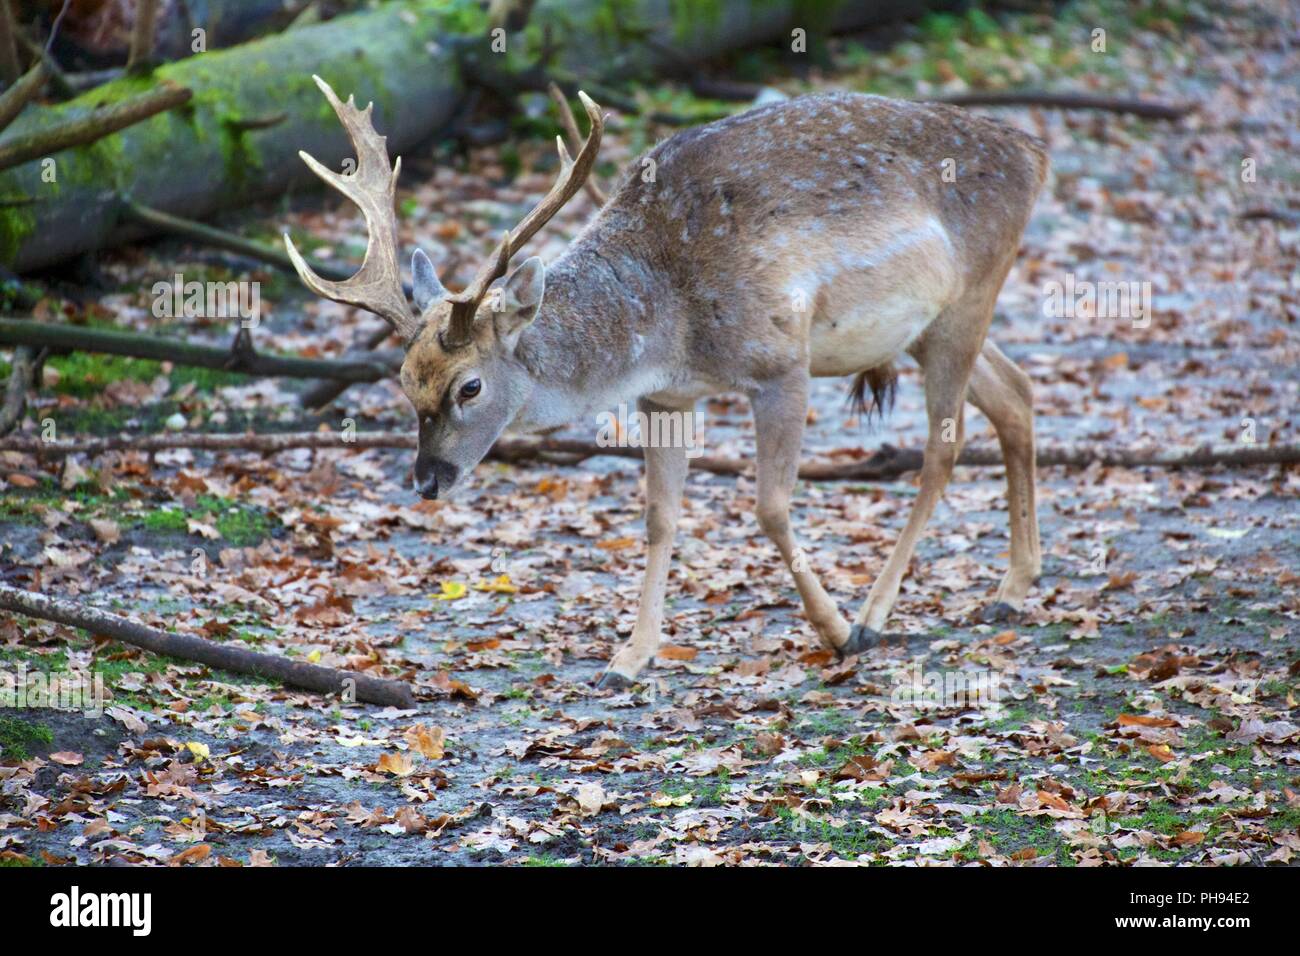 deer at the bavarian forest national park germany Stock Photo